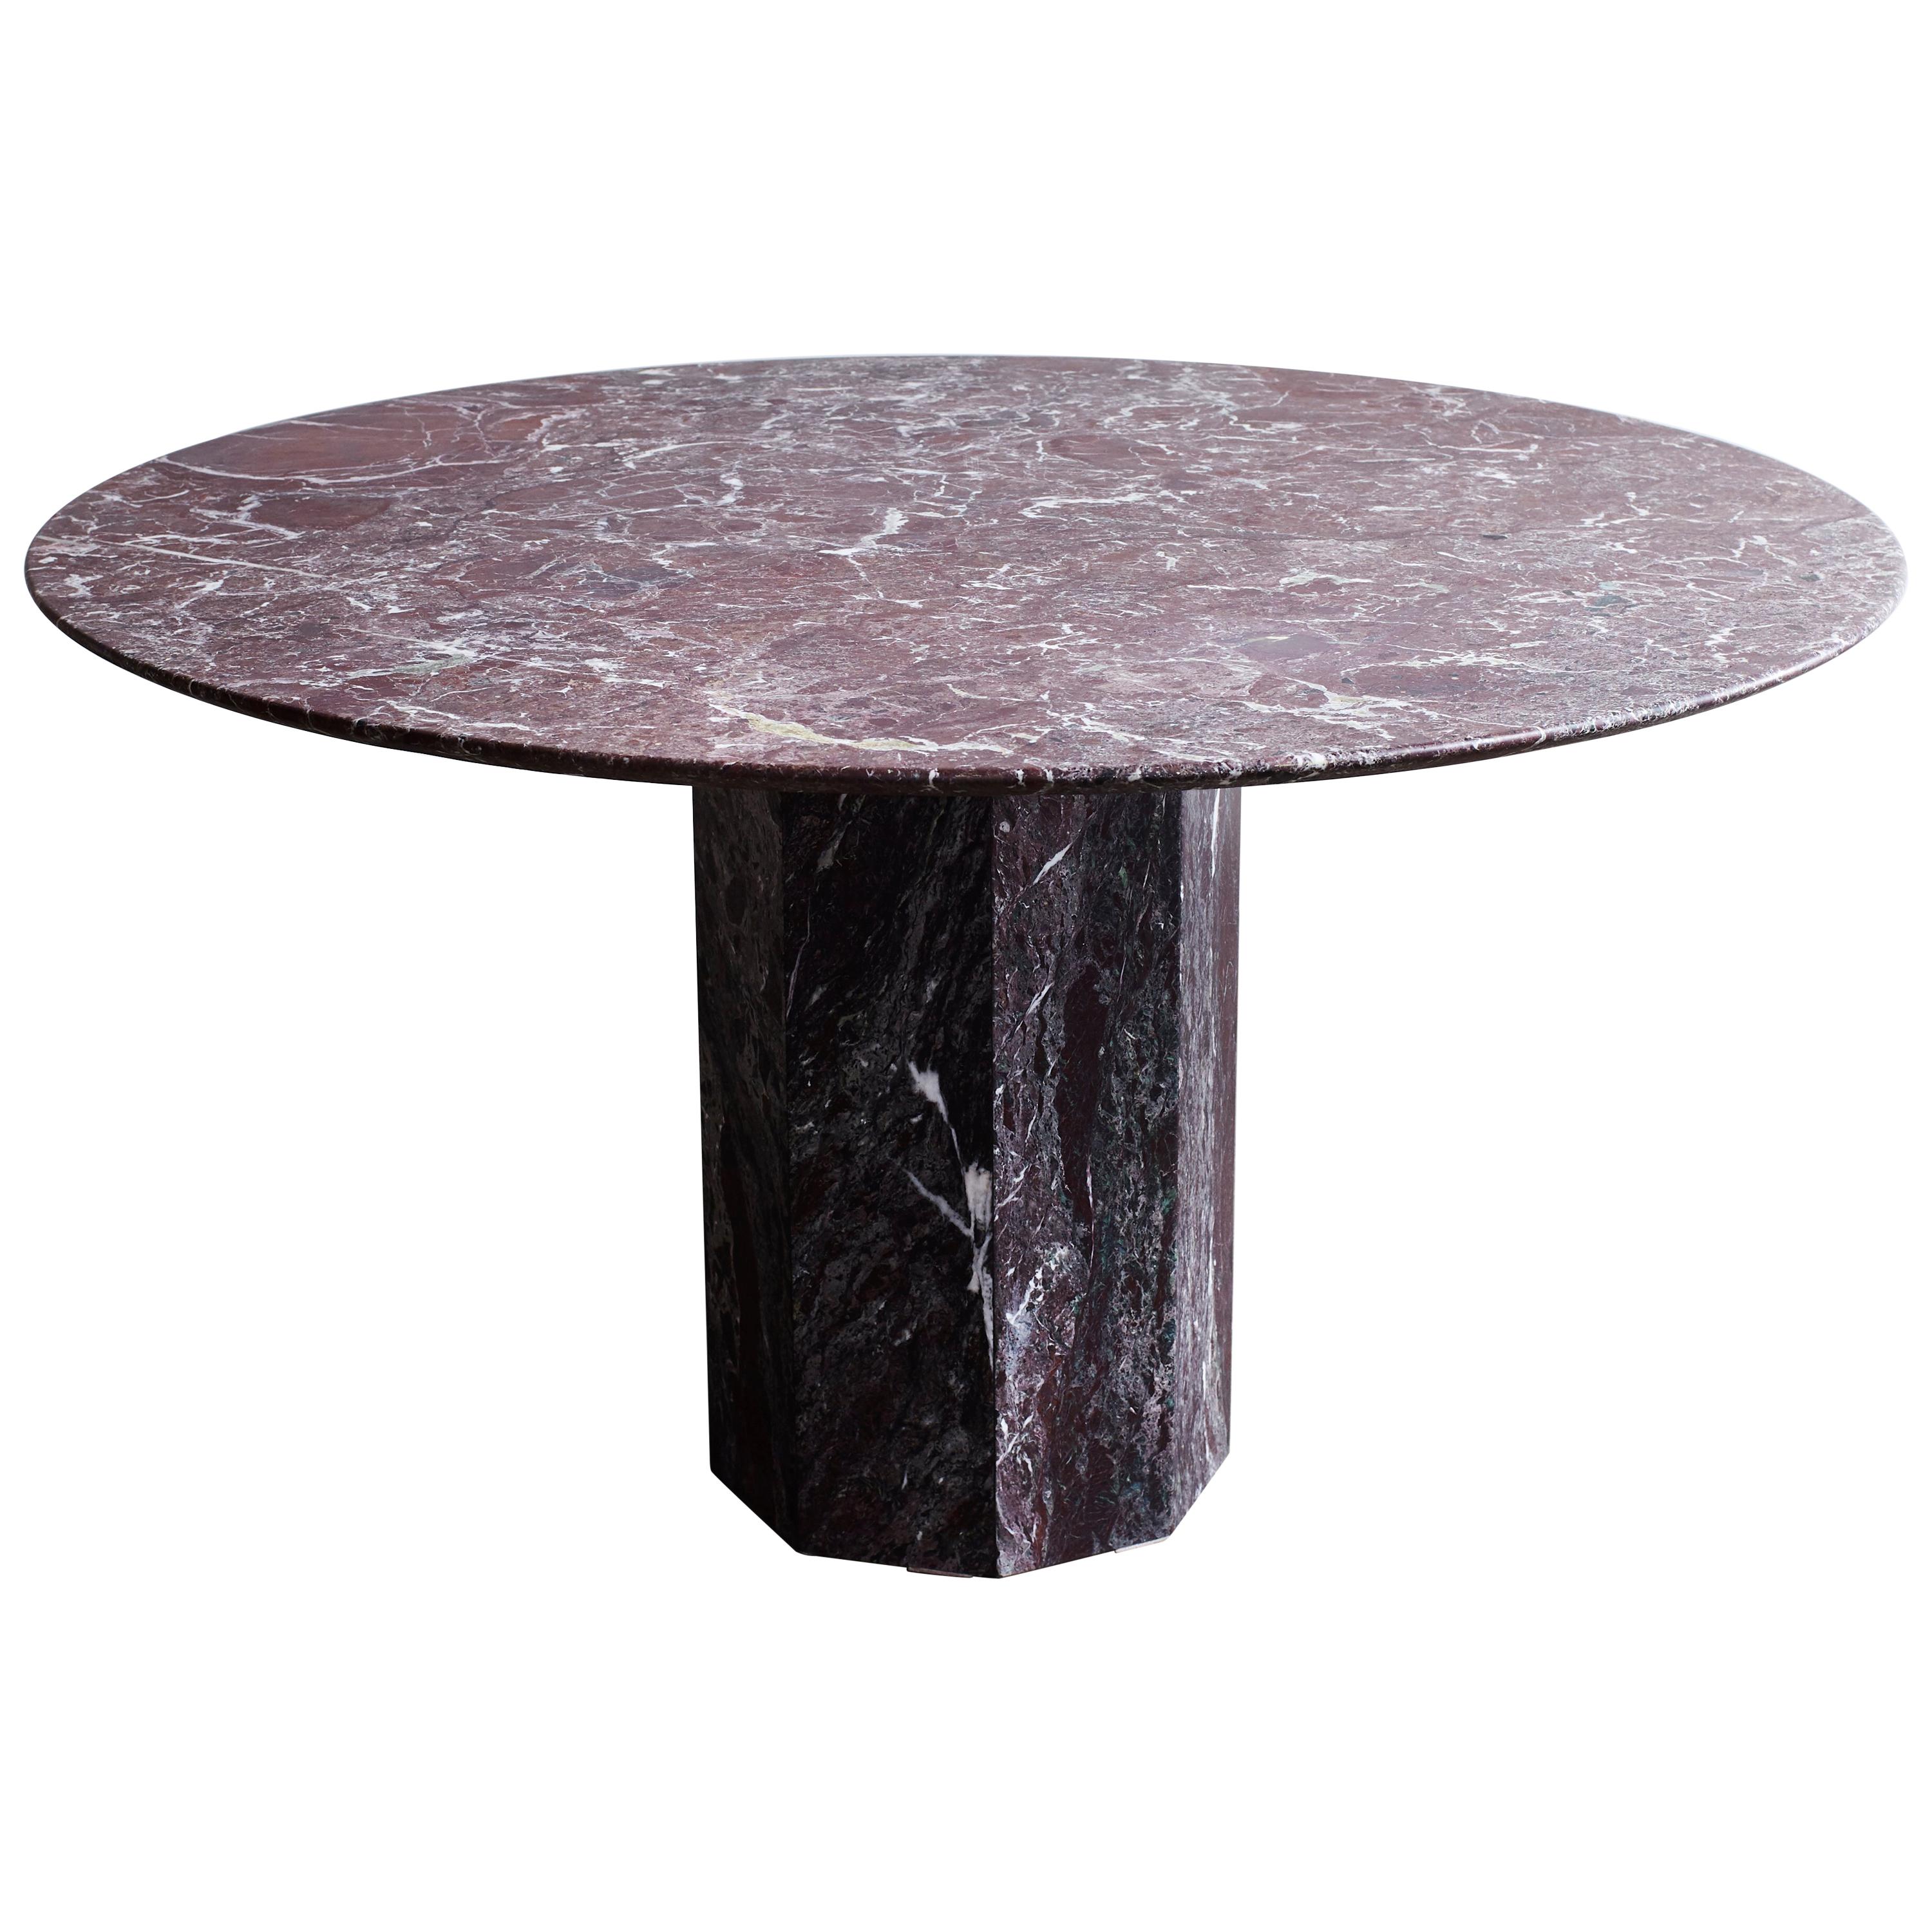 Round Burgundy Honed Marble Faceted Pedestal Table